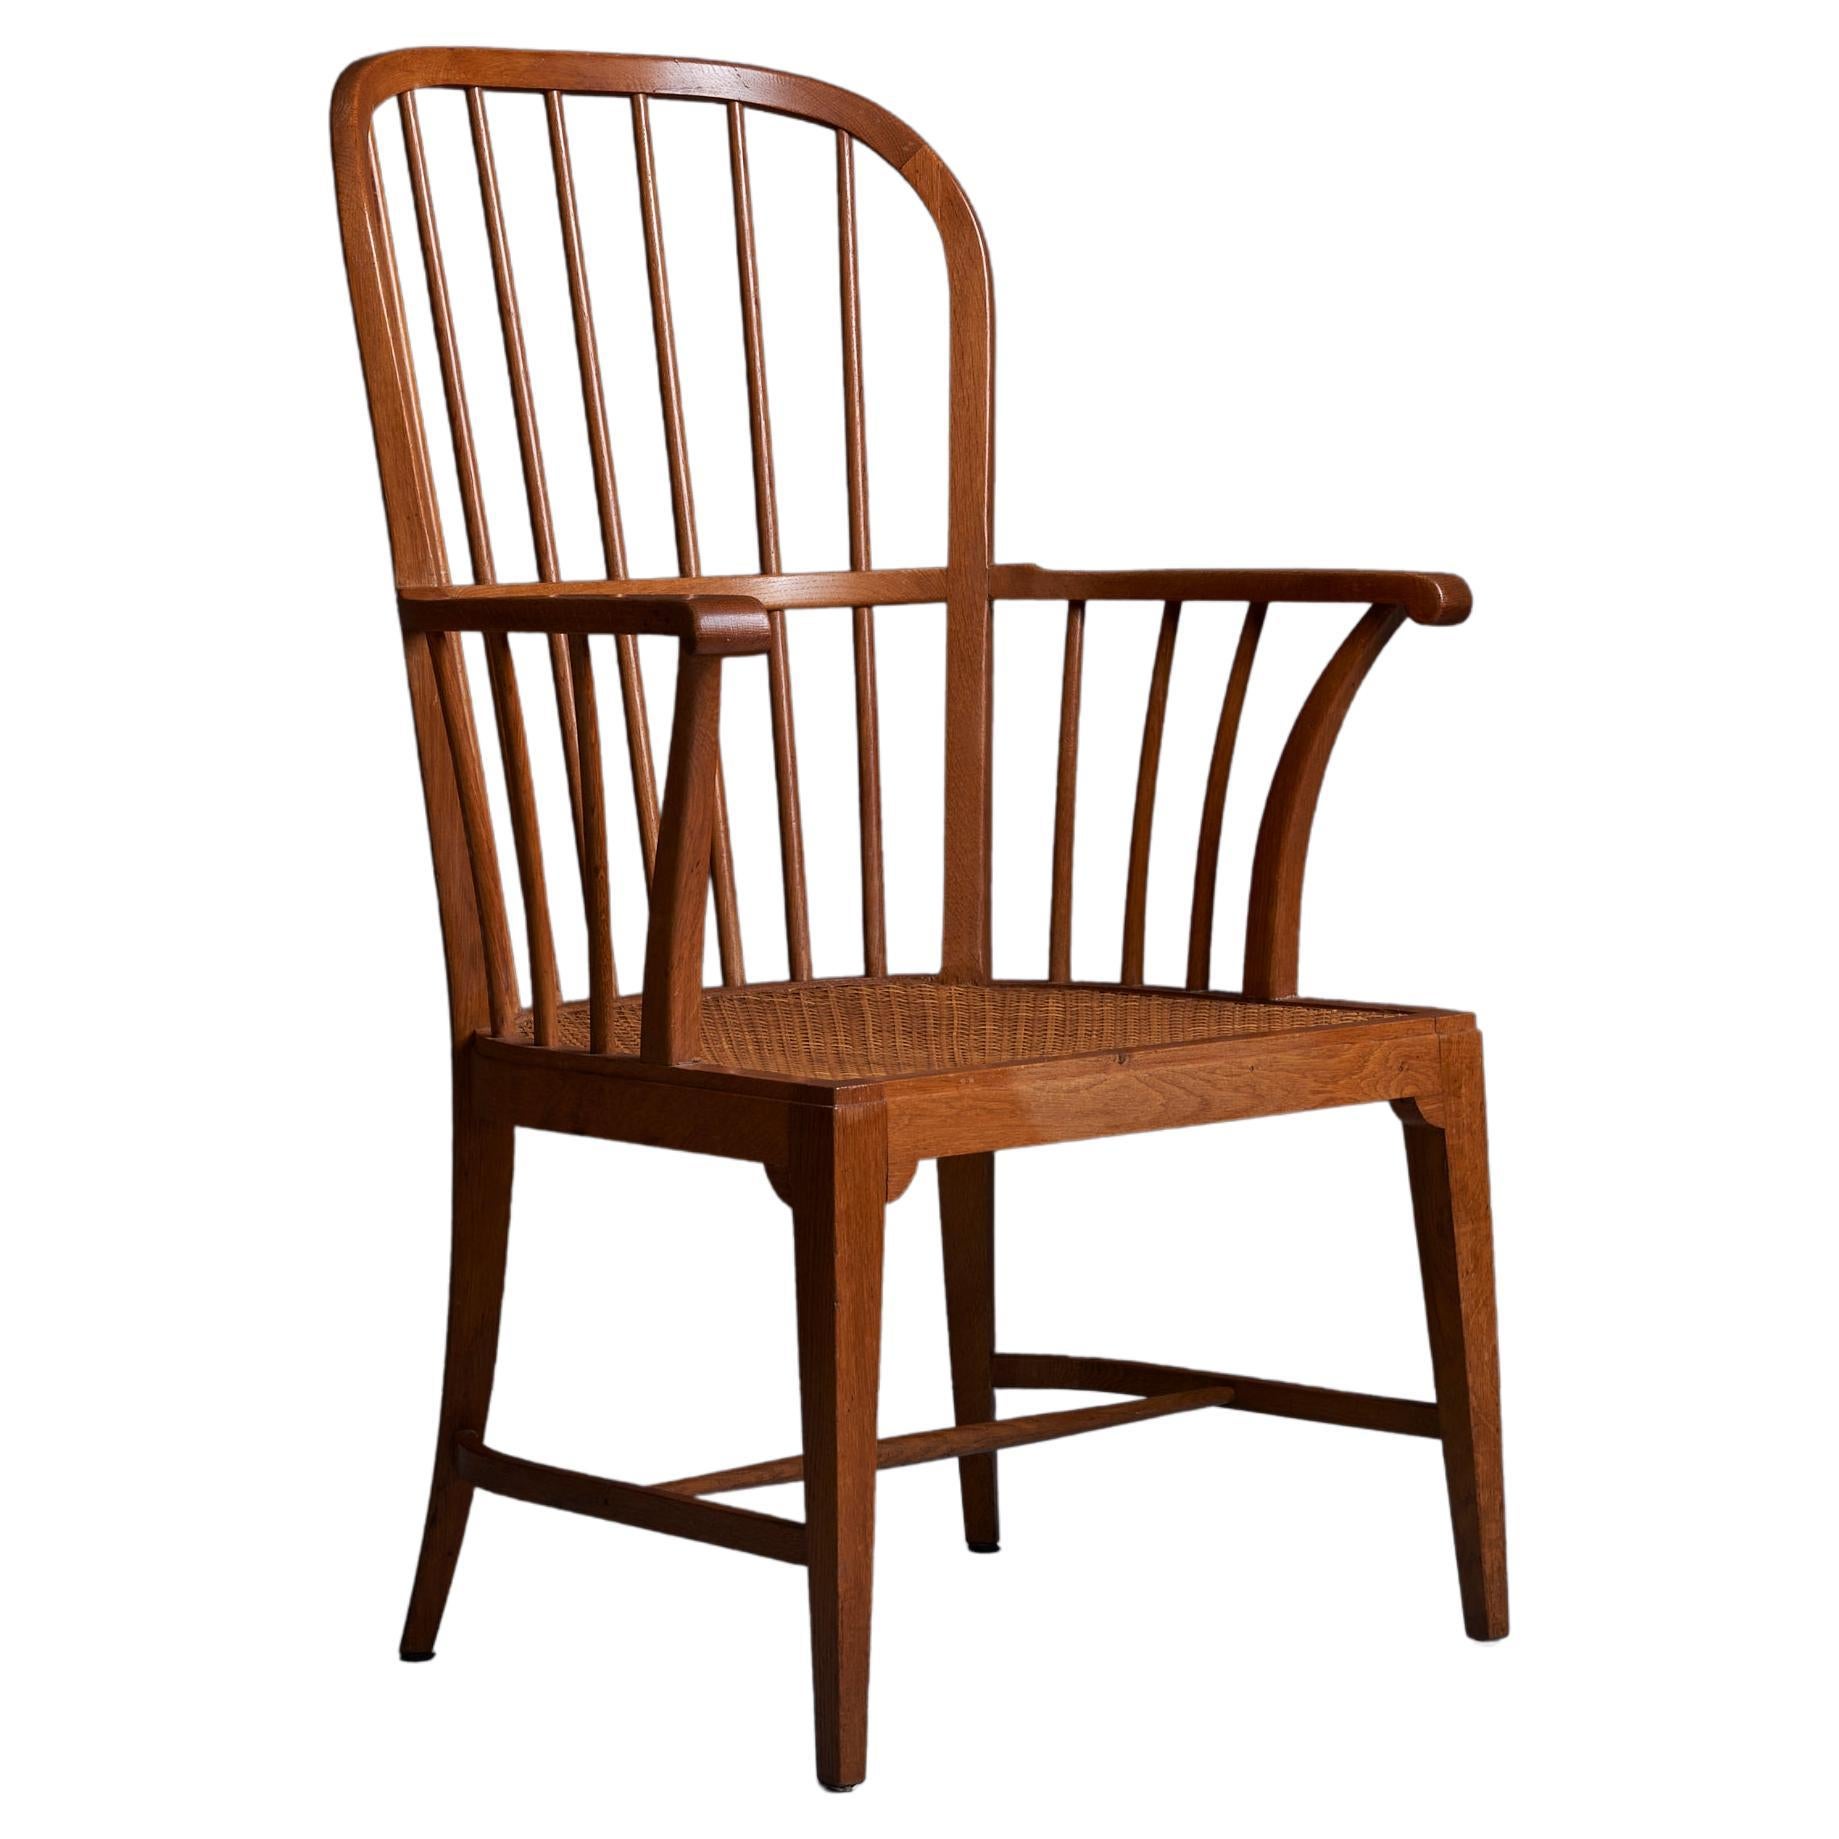 Danish 1950s Oak Windsor Arm Chair with Webbed Seat